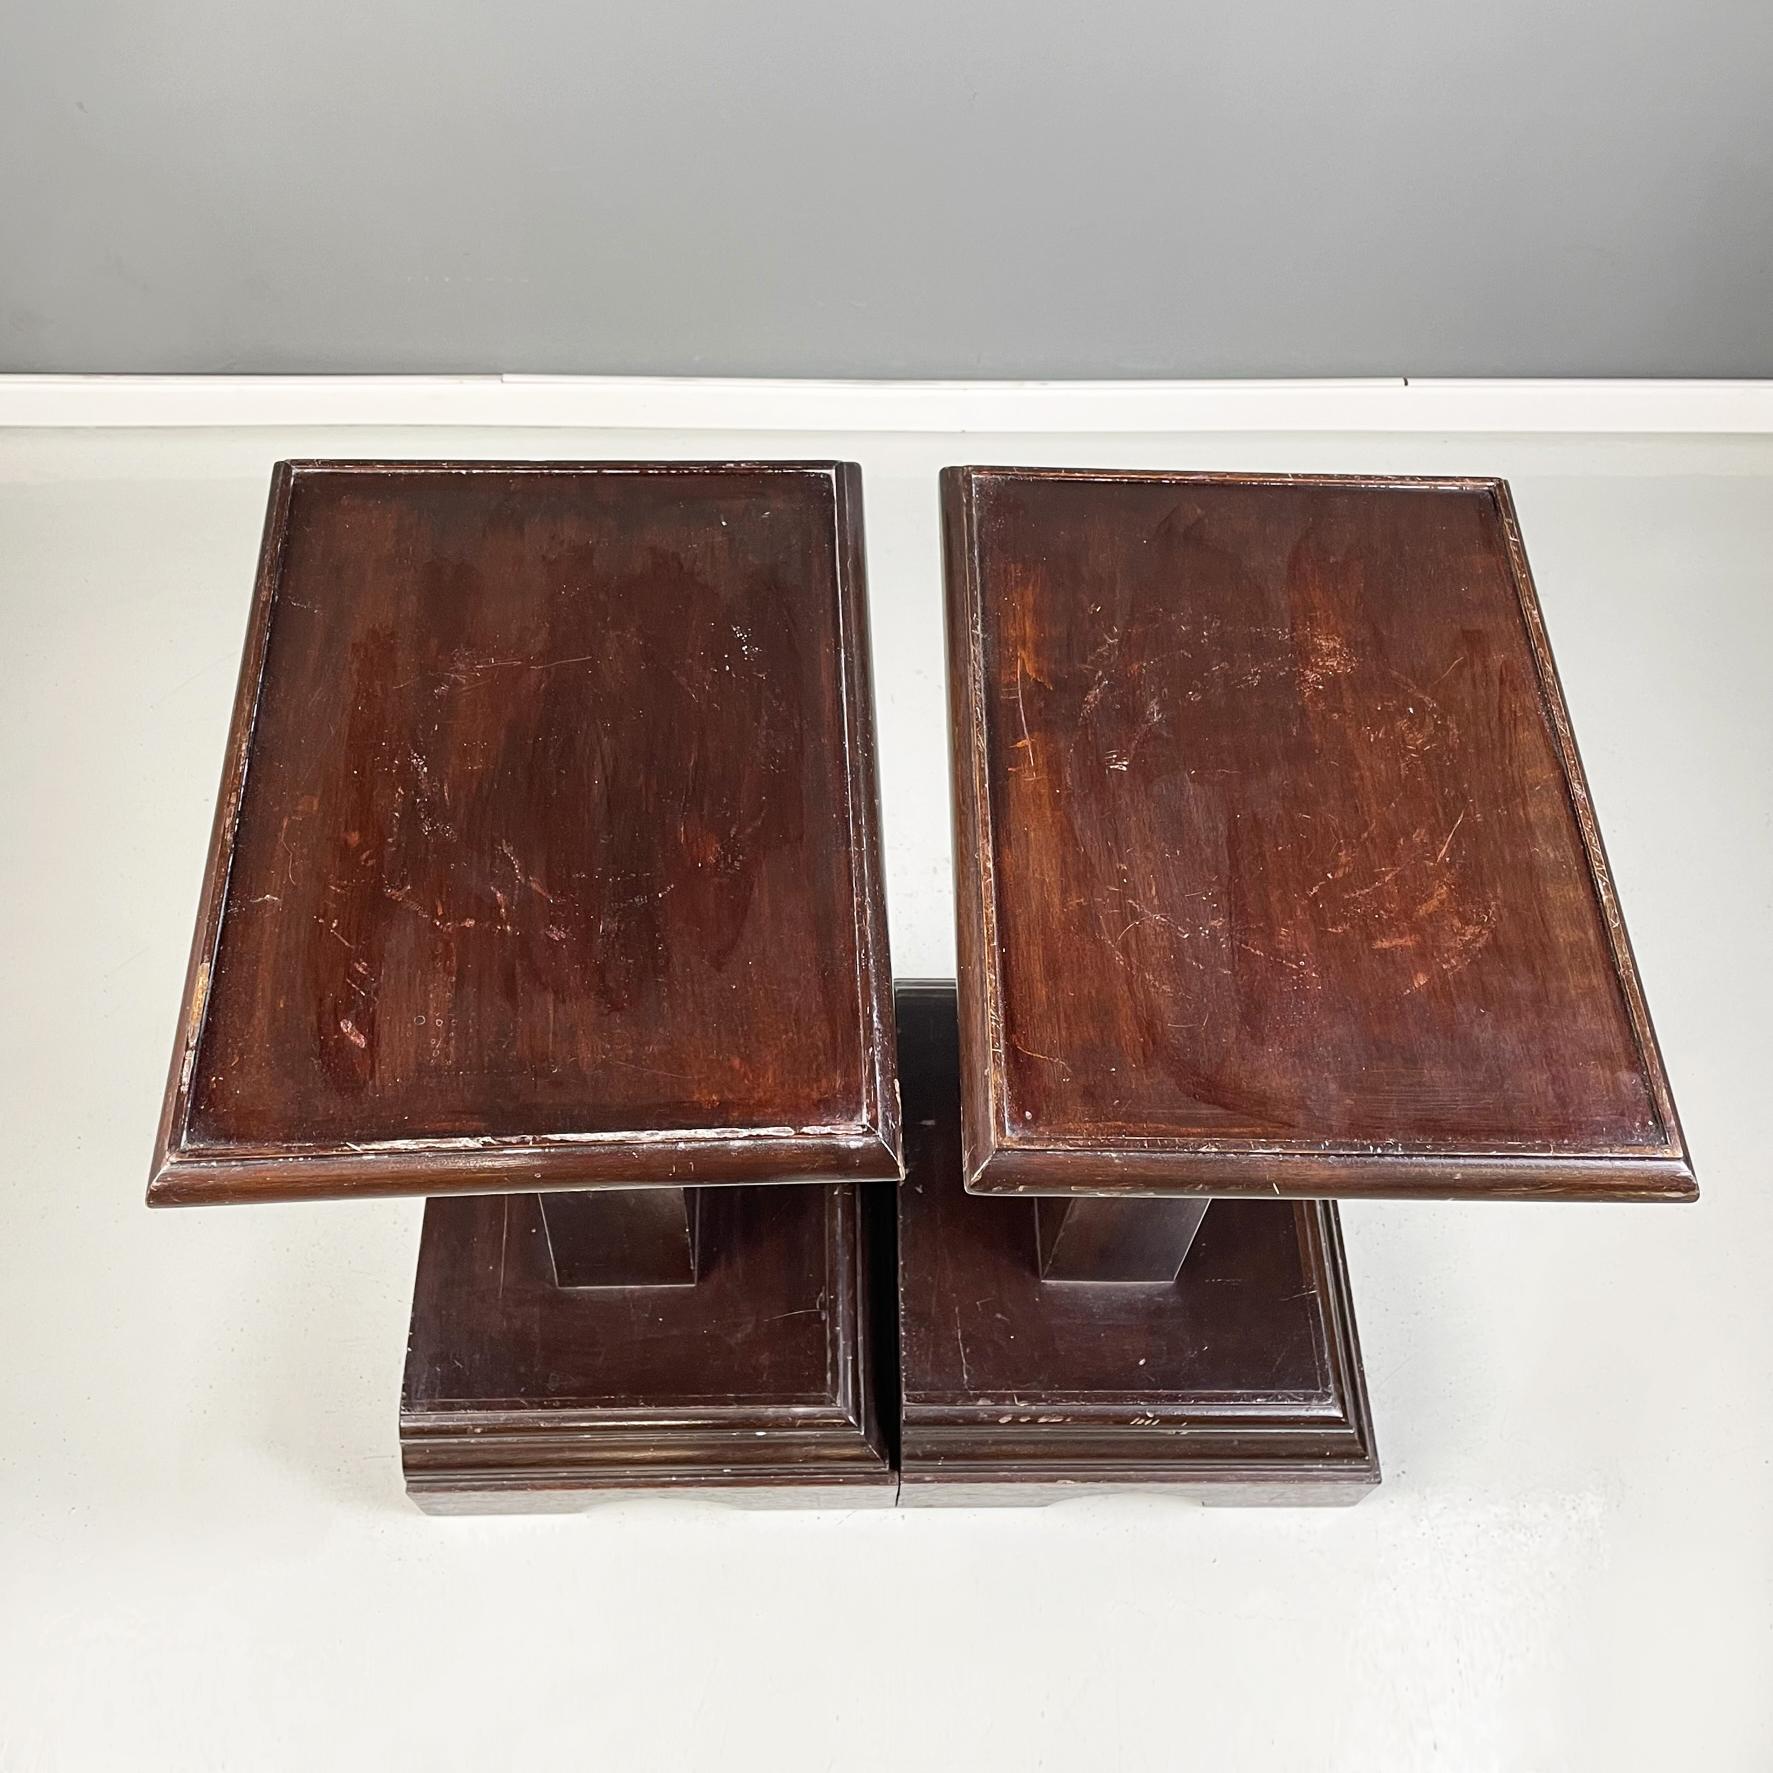 Early 20th Century Italian Antique Wooden Side Tables or Pedestals, Early 1900s For Sale